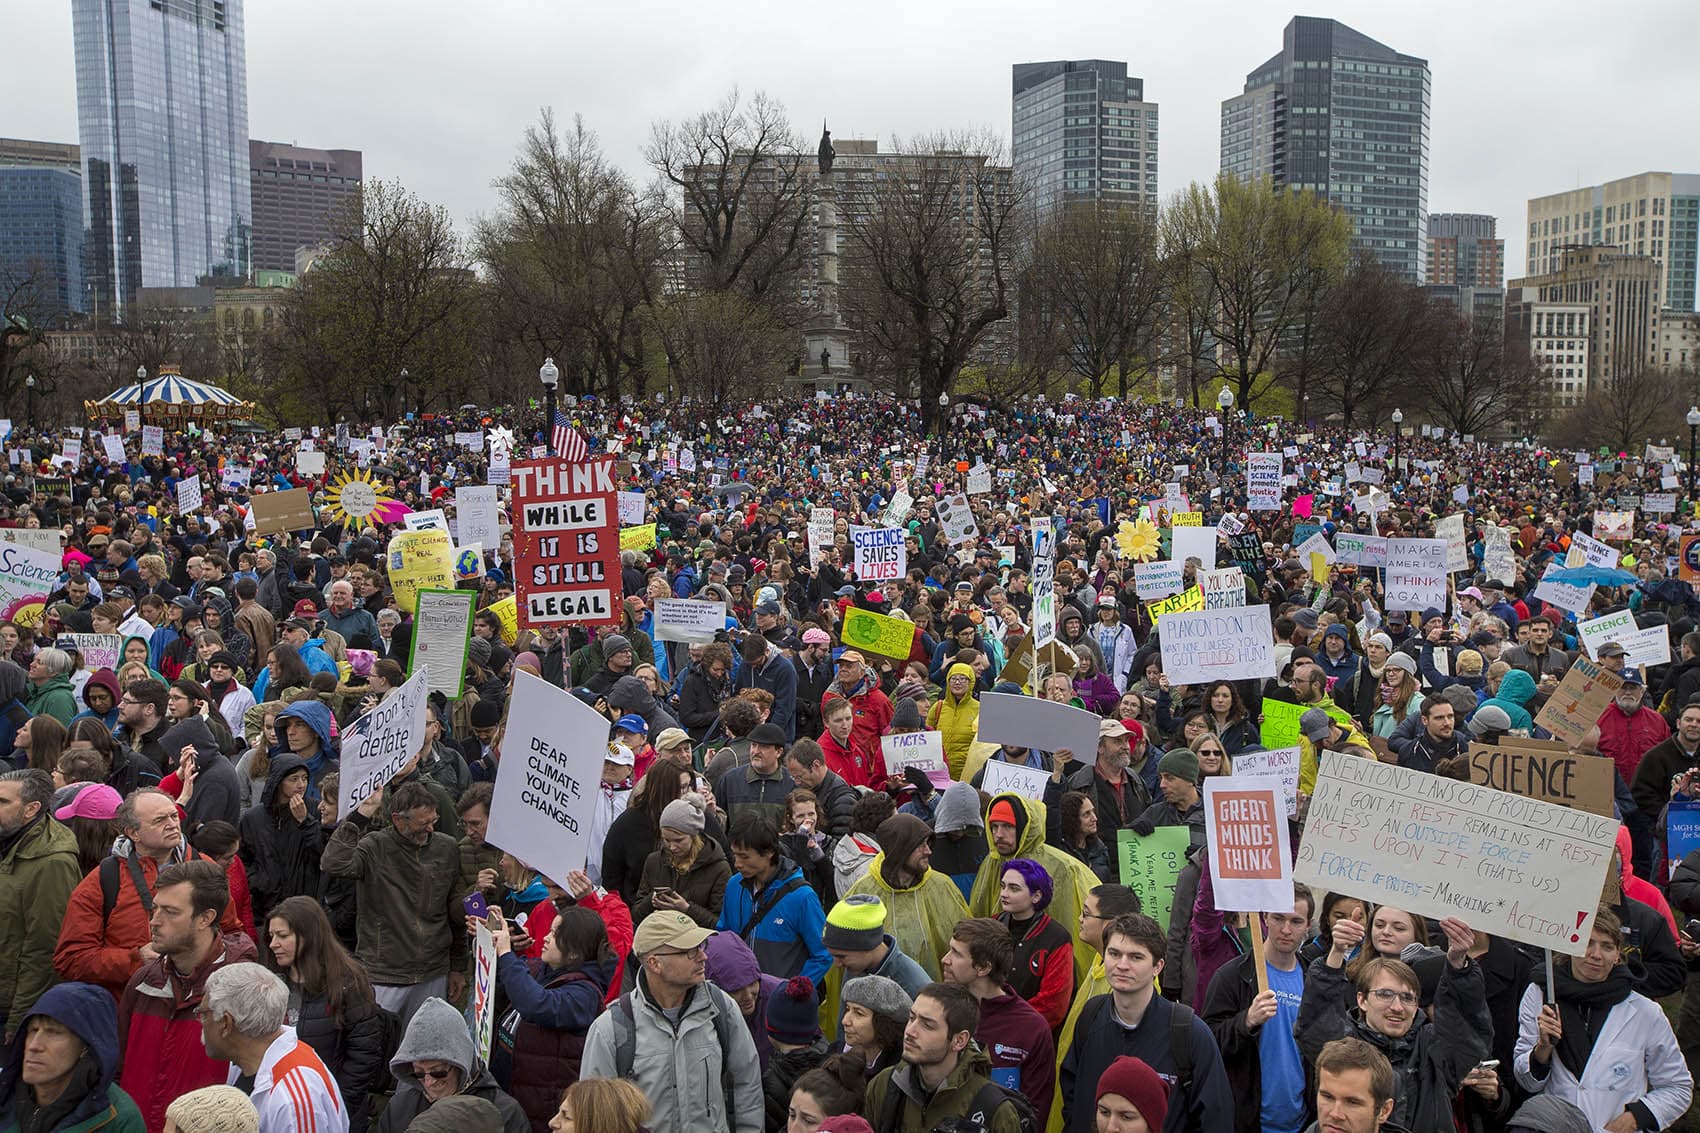 The crowd gathered on Boston Common Saturday for the March For Science. (Jesse Costa/WBUR)